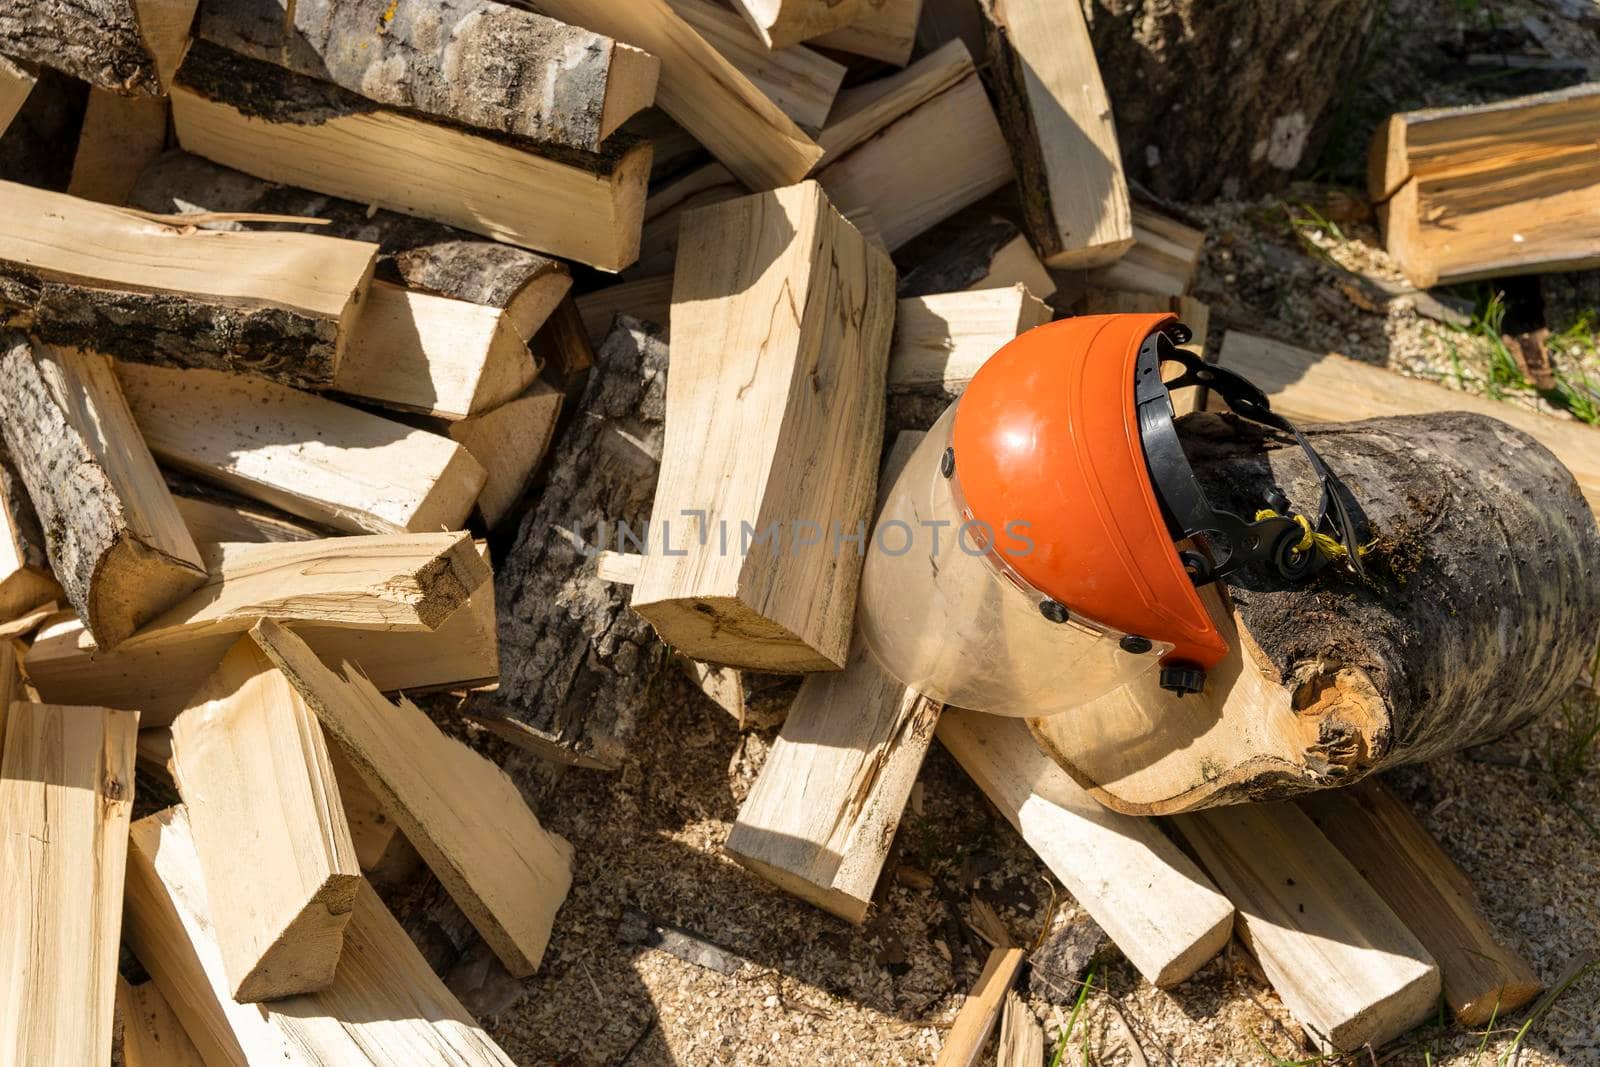 a pile of chopped firewood in the yard of the house and a protective mask to protect the eyes during chopping and sawing firewood